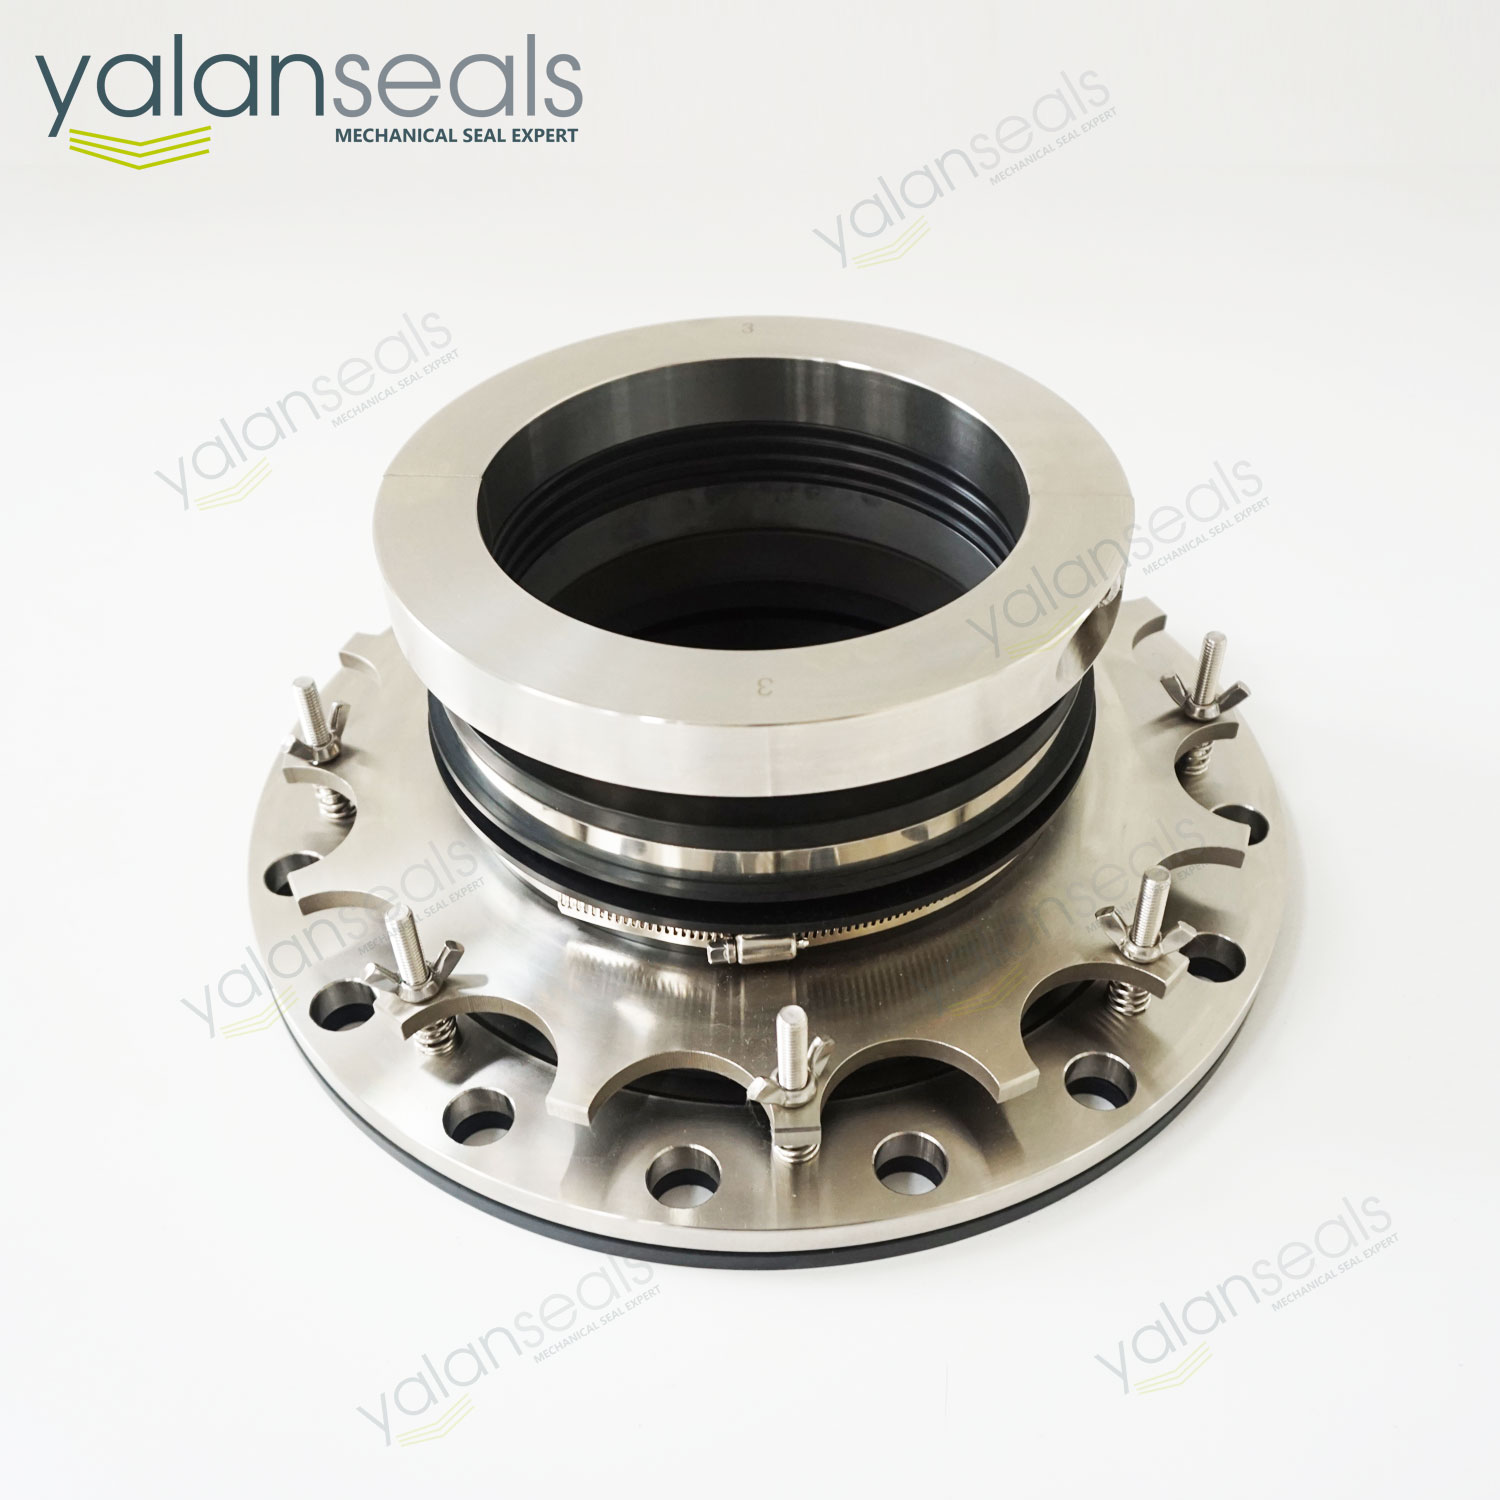 YLTRD-FL Mechanical Seal for Immersion Rollers